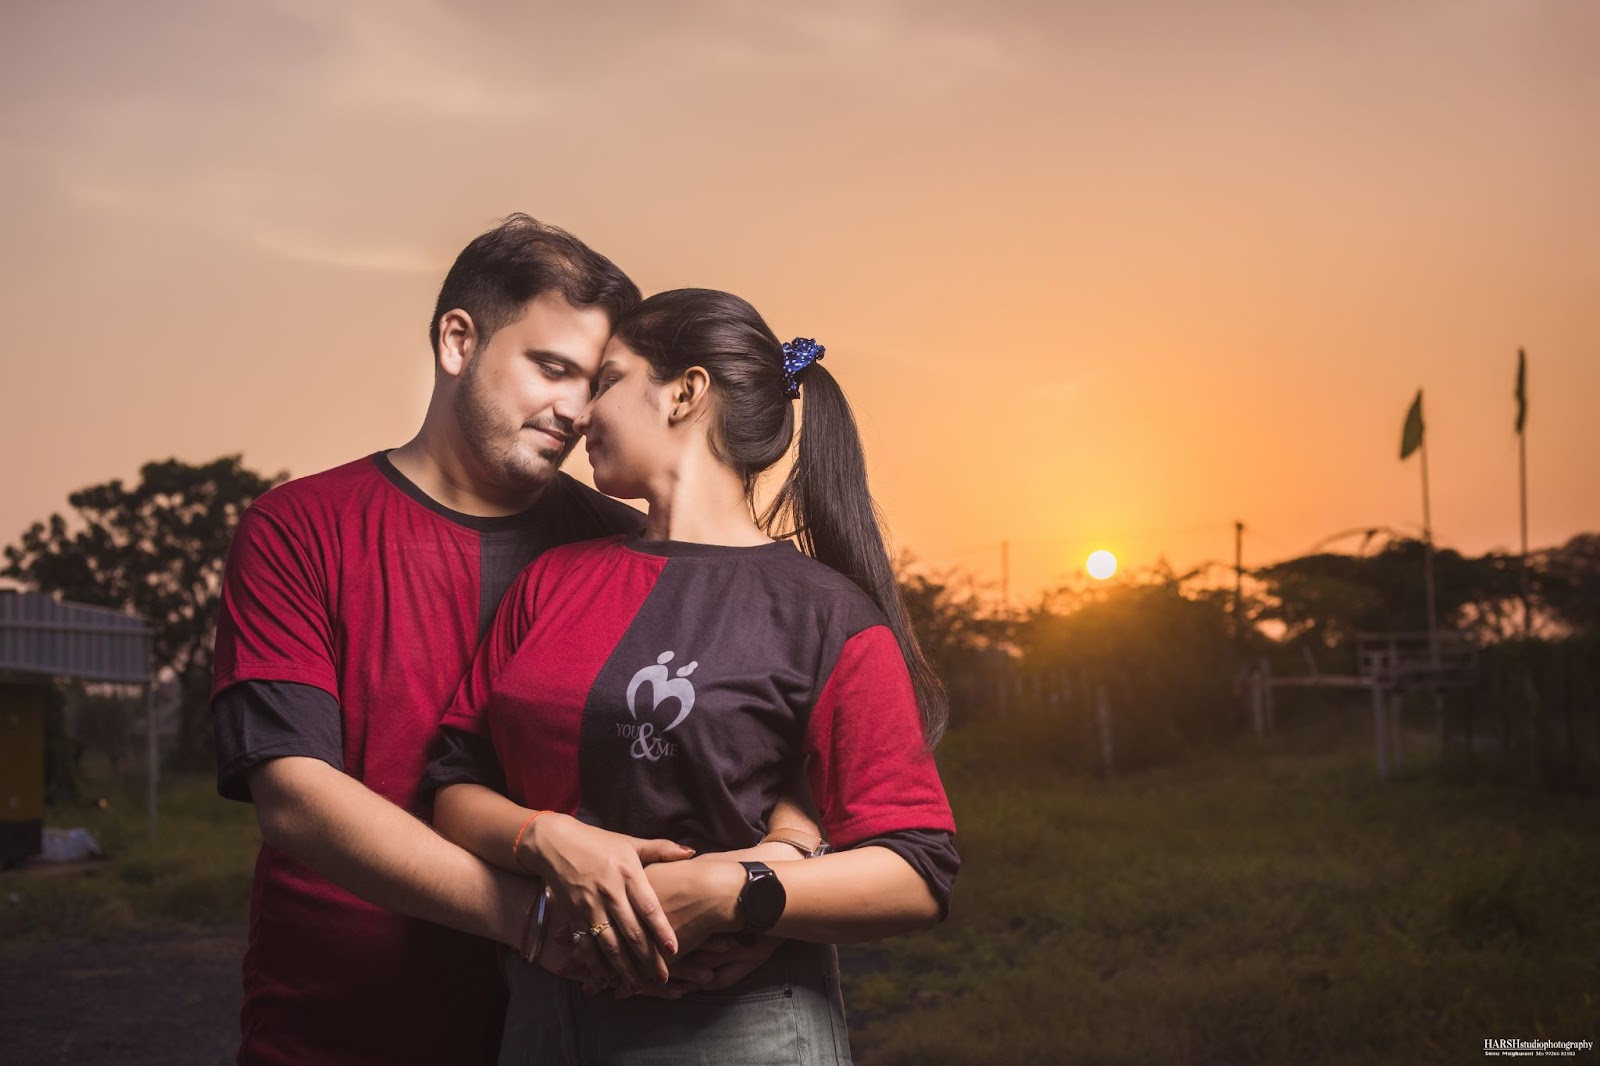 Romantic moment as couple gazes at each other during sunset in Indore. Captured by Harsh Studio Photography, a leading wedding photographer in Indore, known for their exceptional team and expertise. Located in Indore, Madhya Pradesh, India.